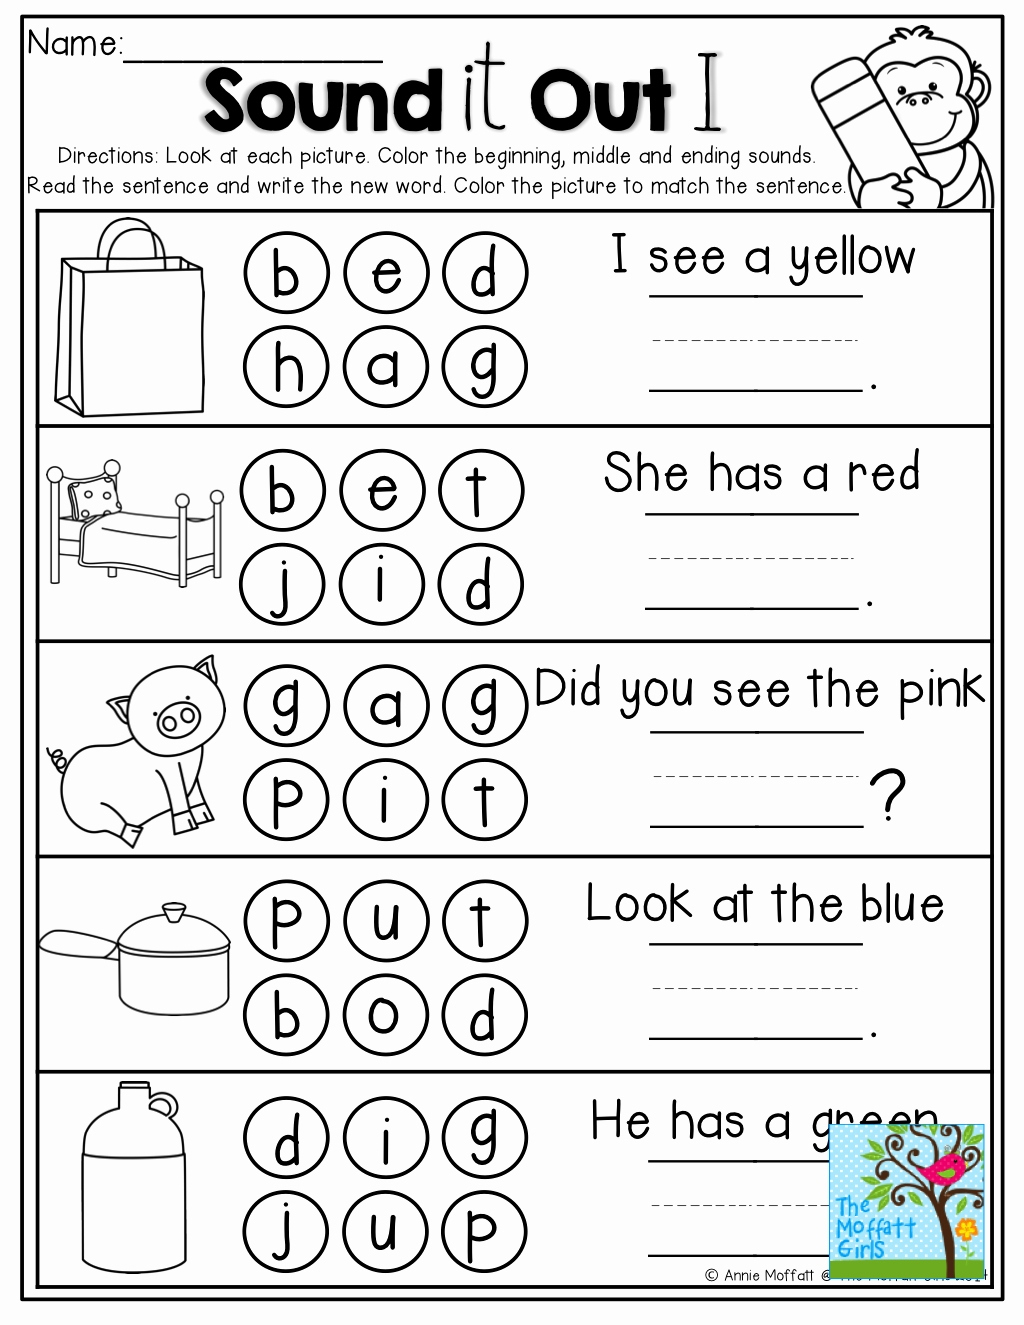 Ending sound Worksheets Free Inspirational sound It Out Beginning Middle and Ending sounds Write